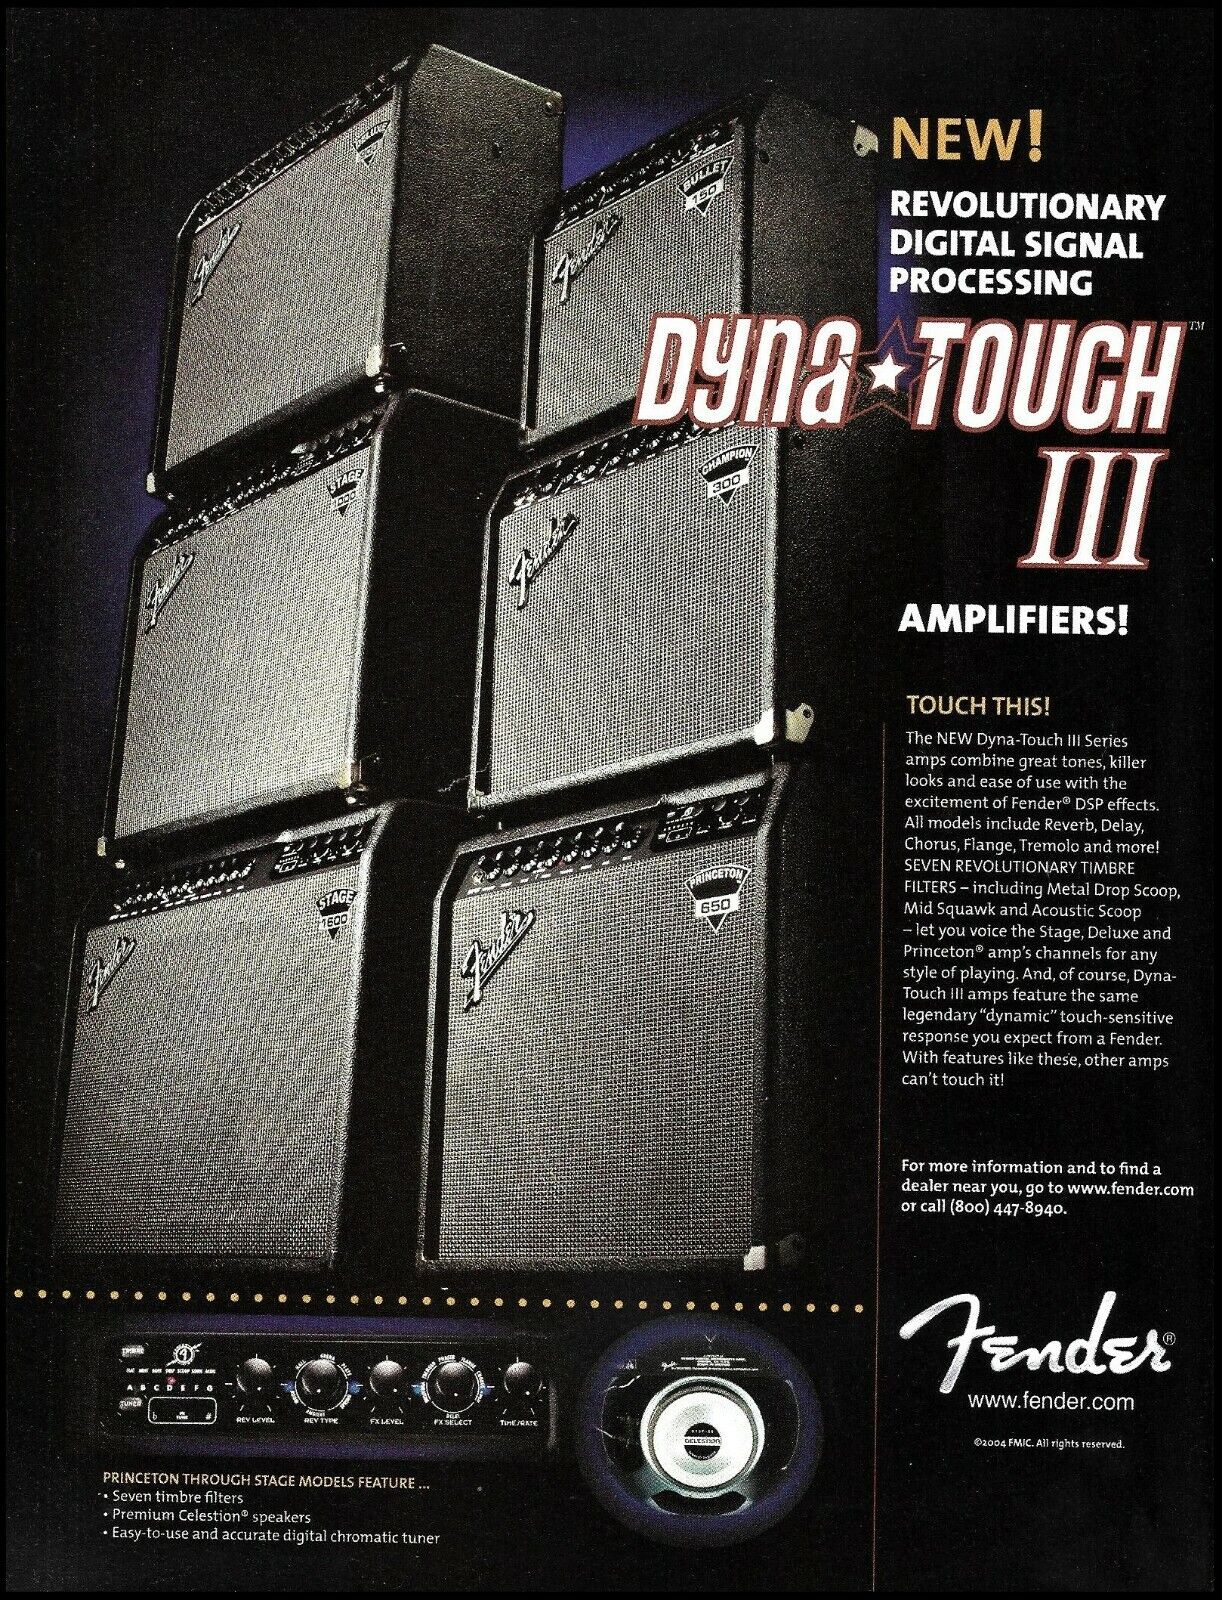 Fender Dyna-Touch III Series Amp 2004 amplifier advertisement 8 x 11 ad print